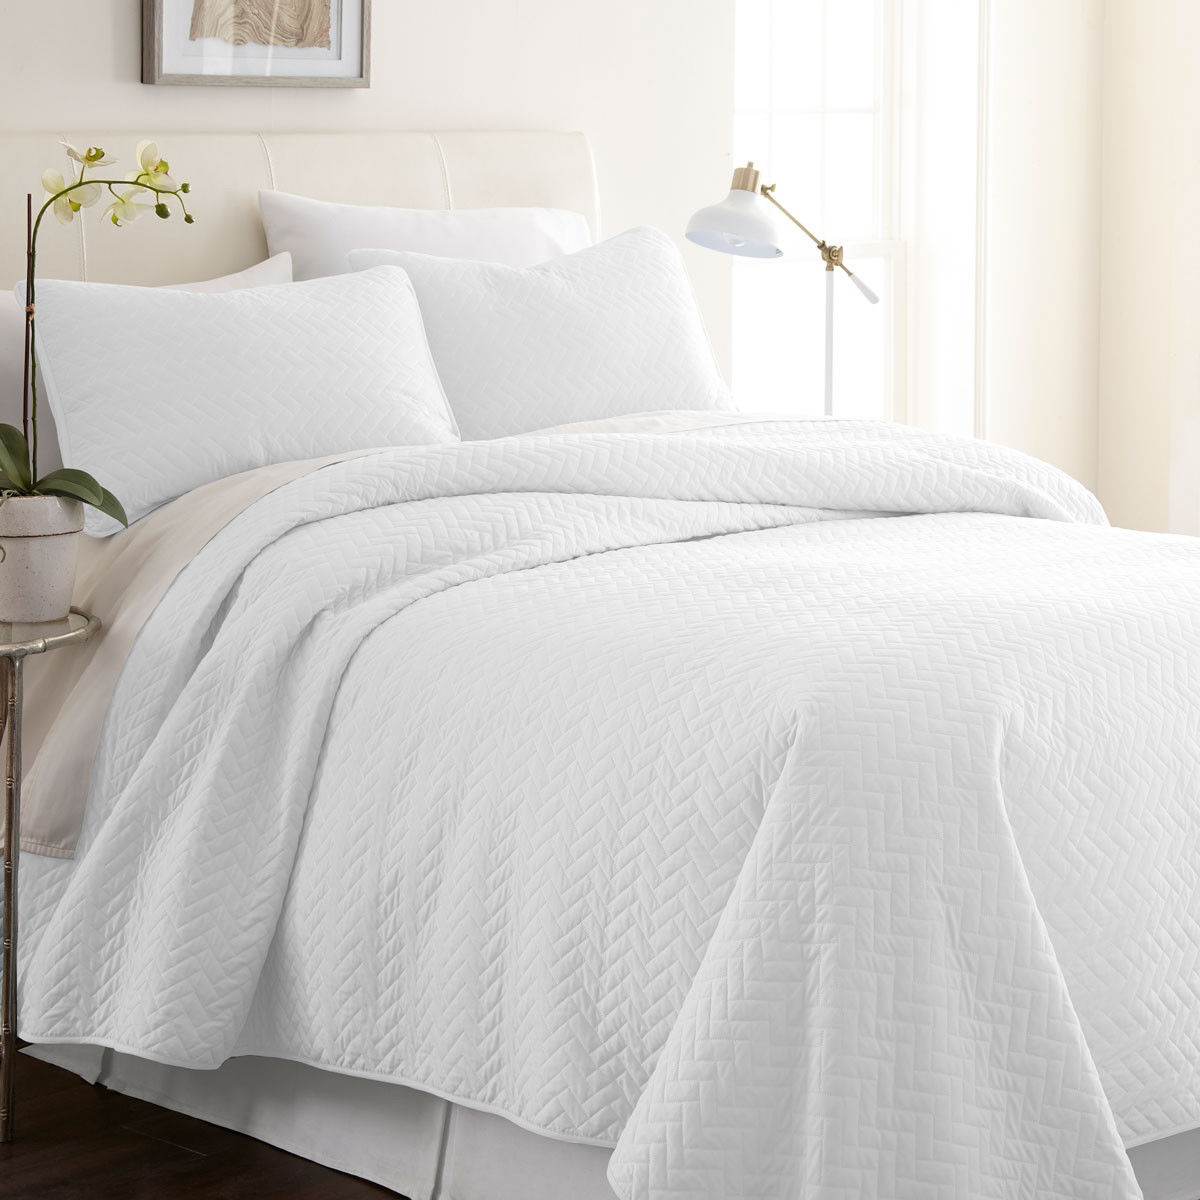 What design element is featured in the 3-Piece Herring Quilted Coverlet Set?